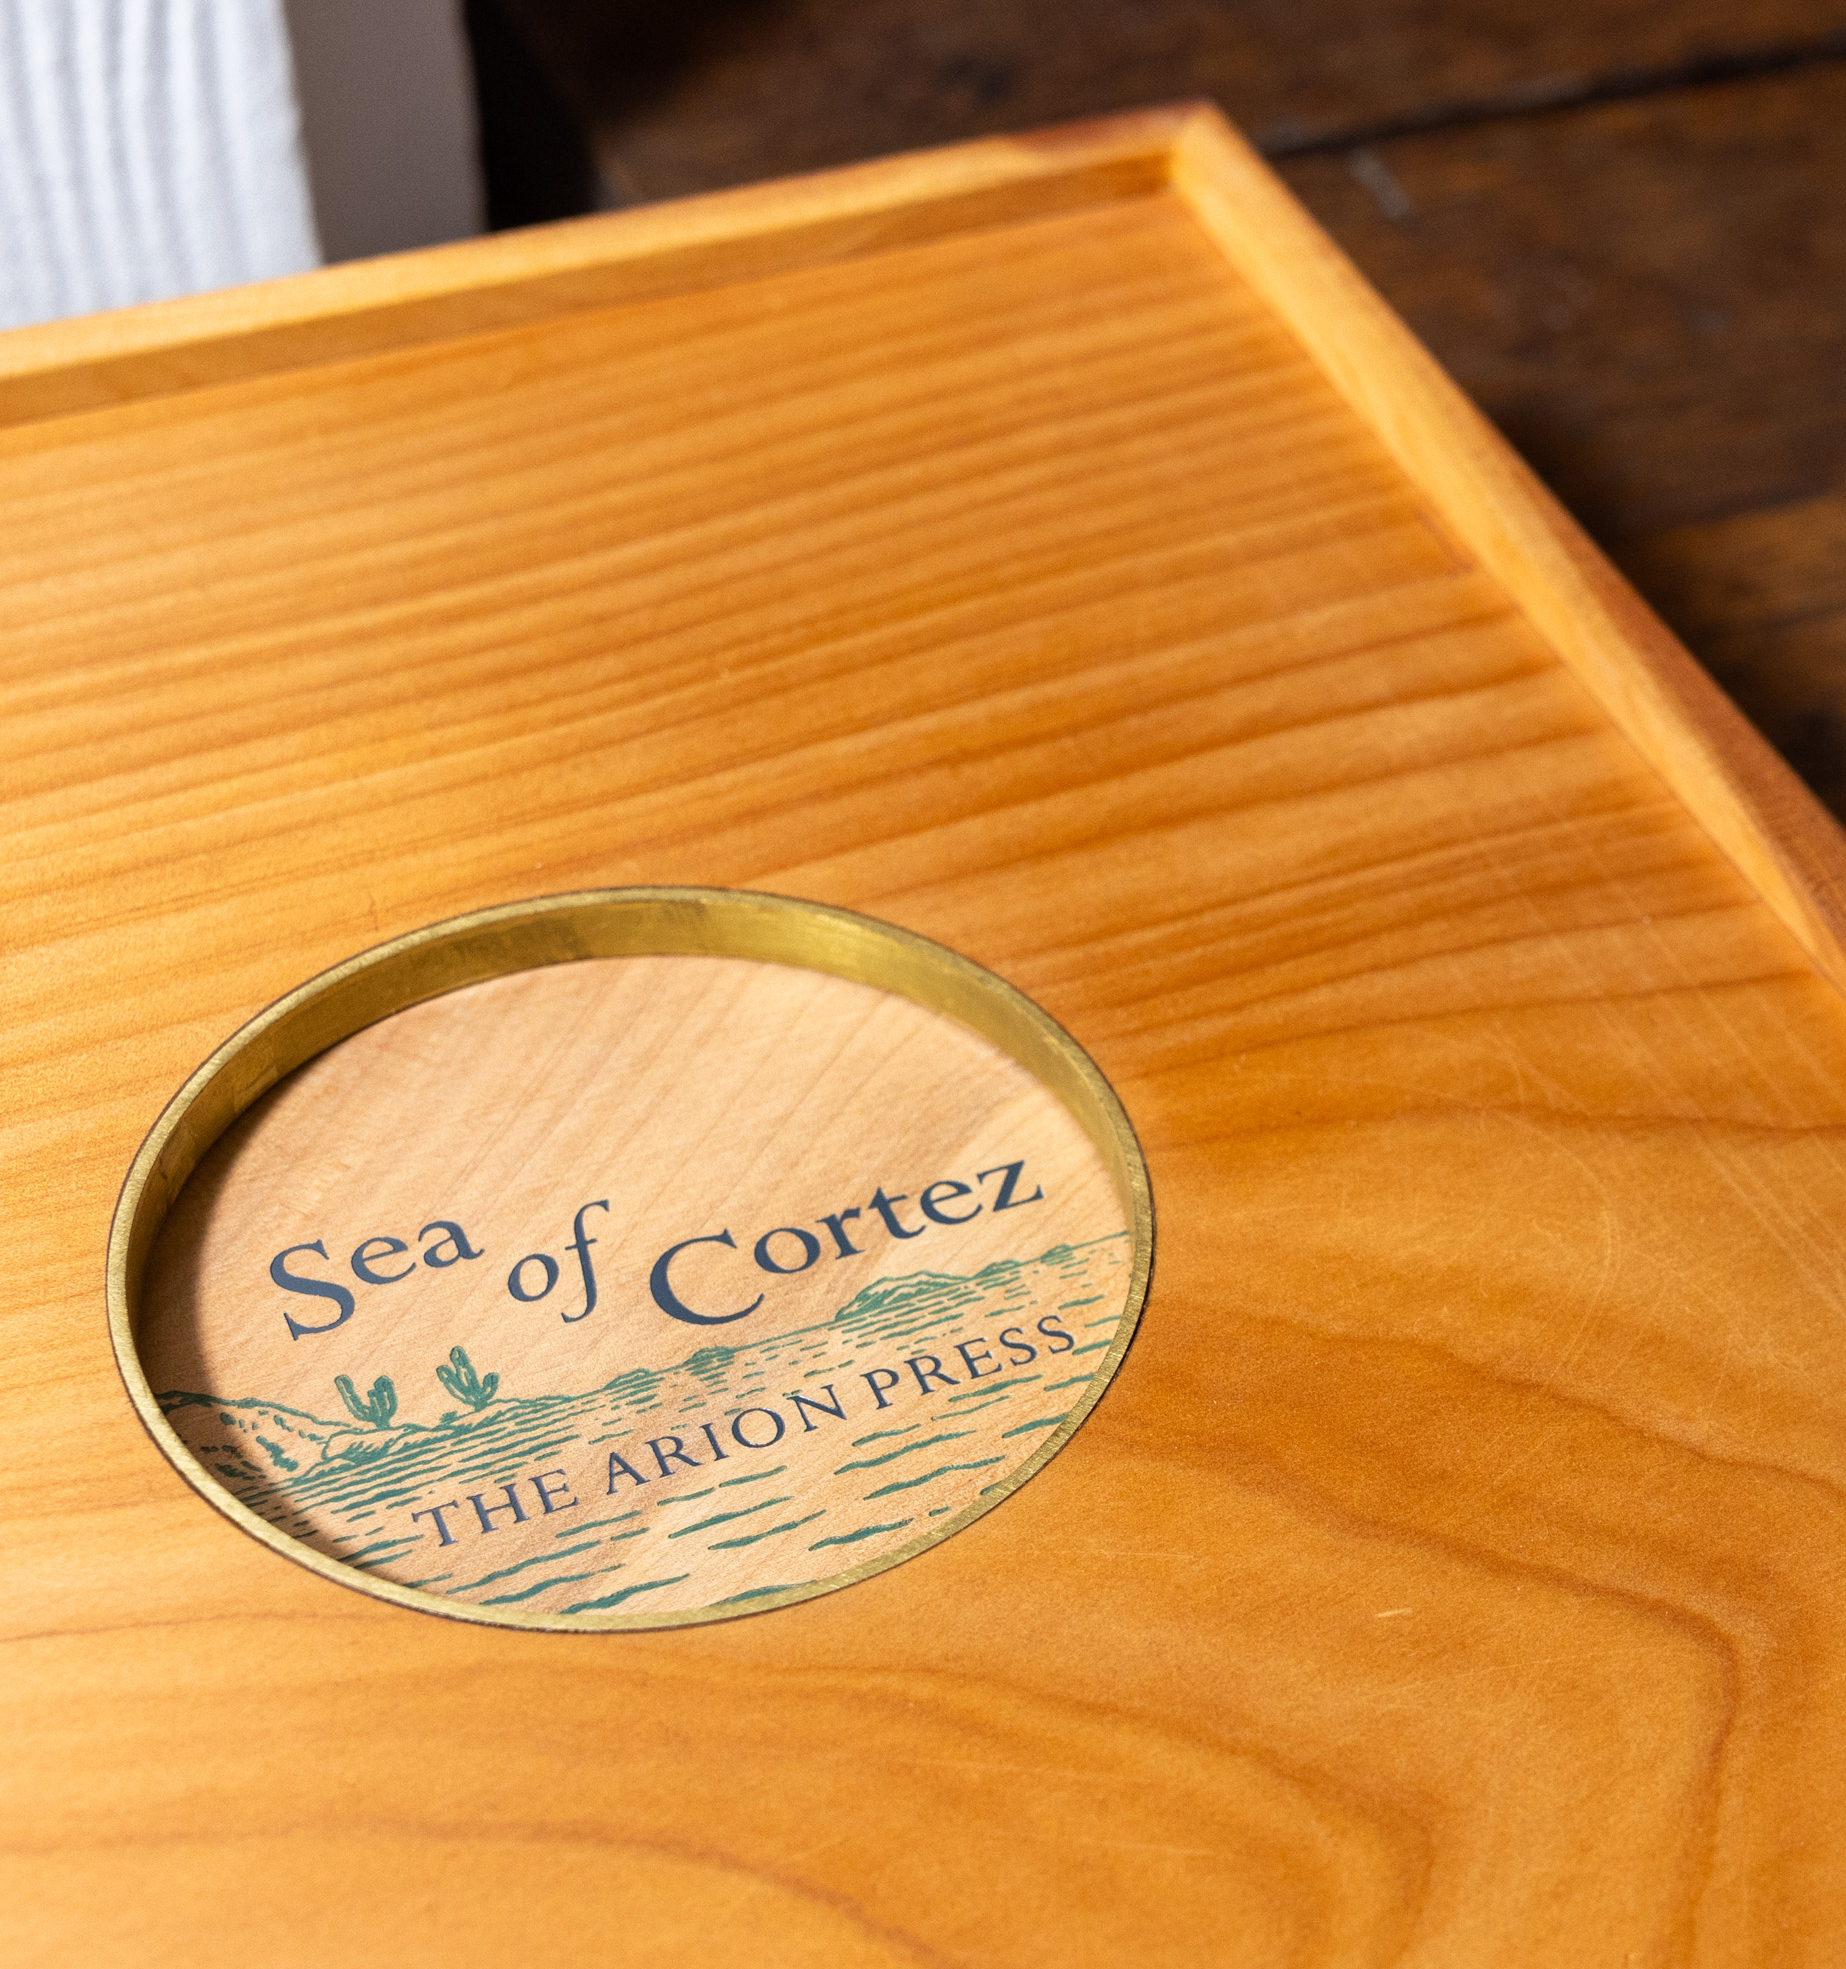 A wooden lid features an inset, rounded, brass-bound window displaying text &quot;Sea of Cortez - The Arion Press&quot; over a stylized wave and cactus illustration.